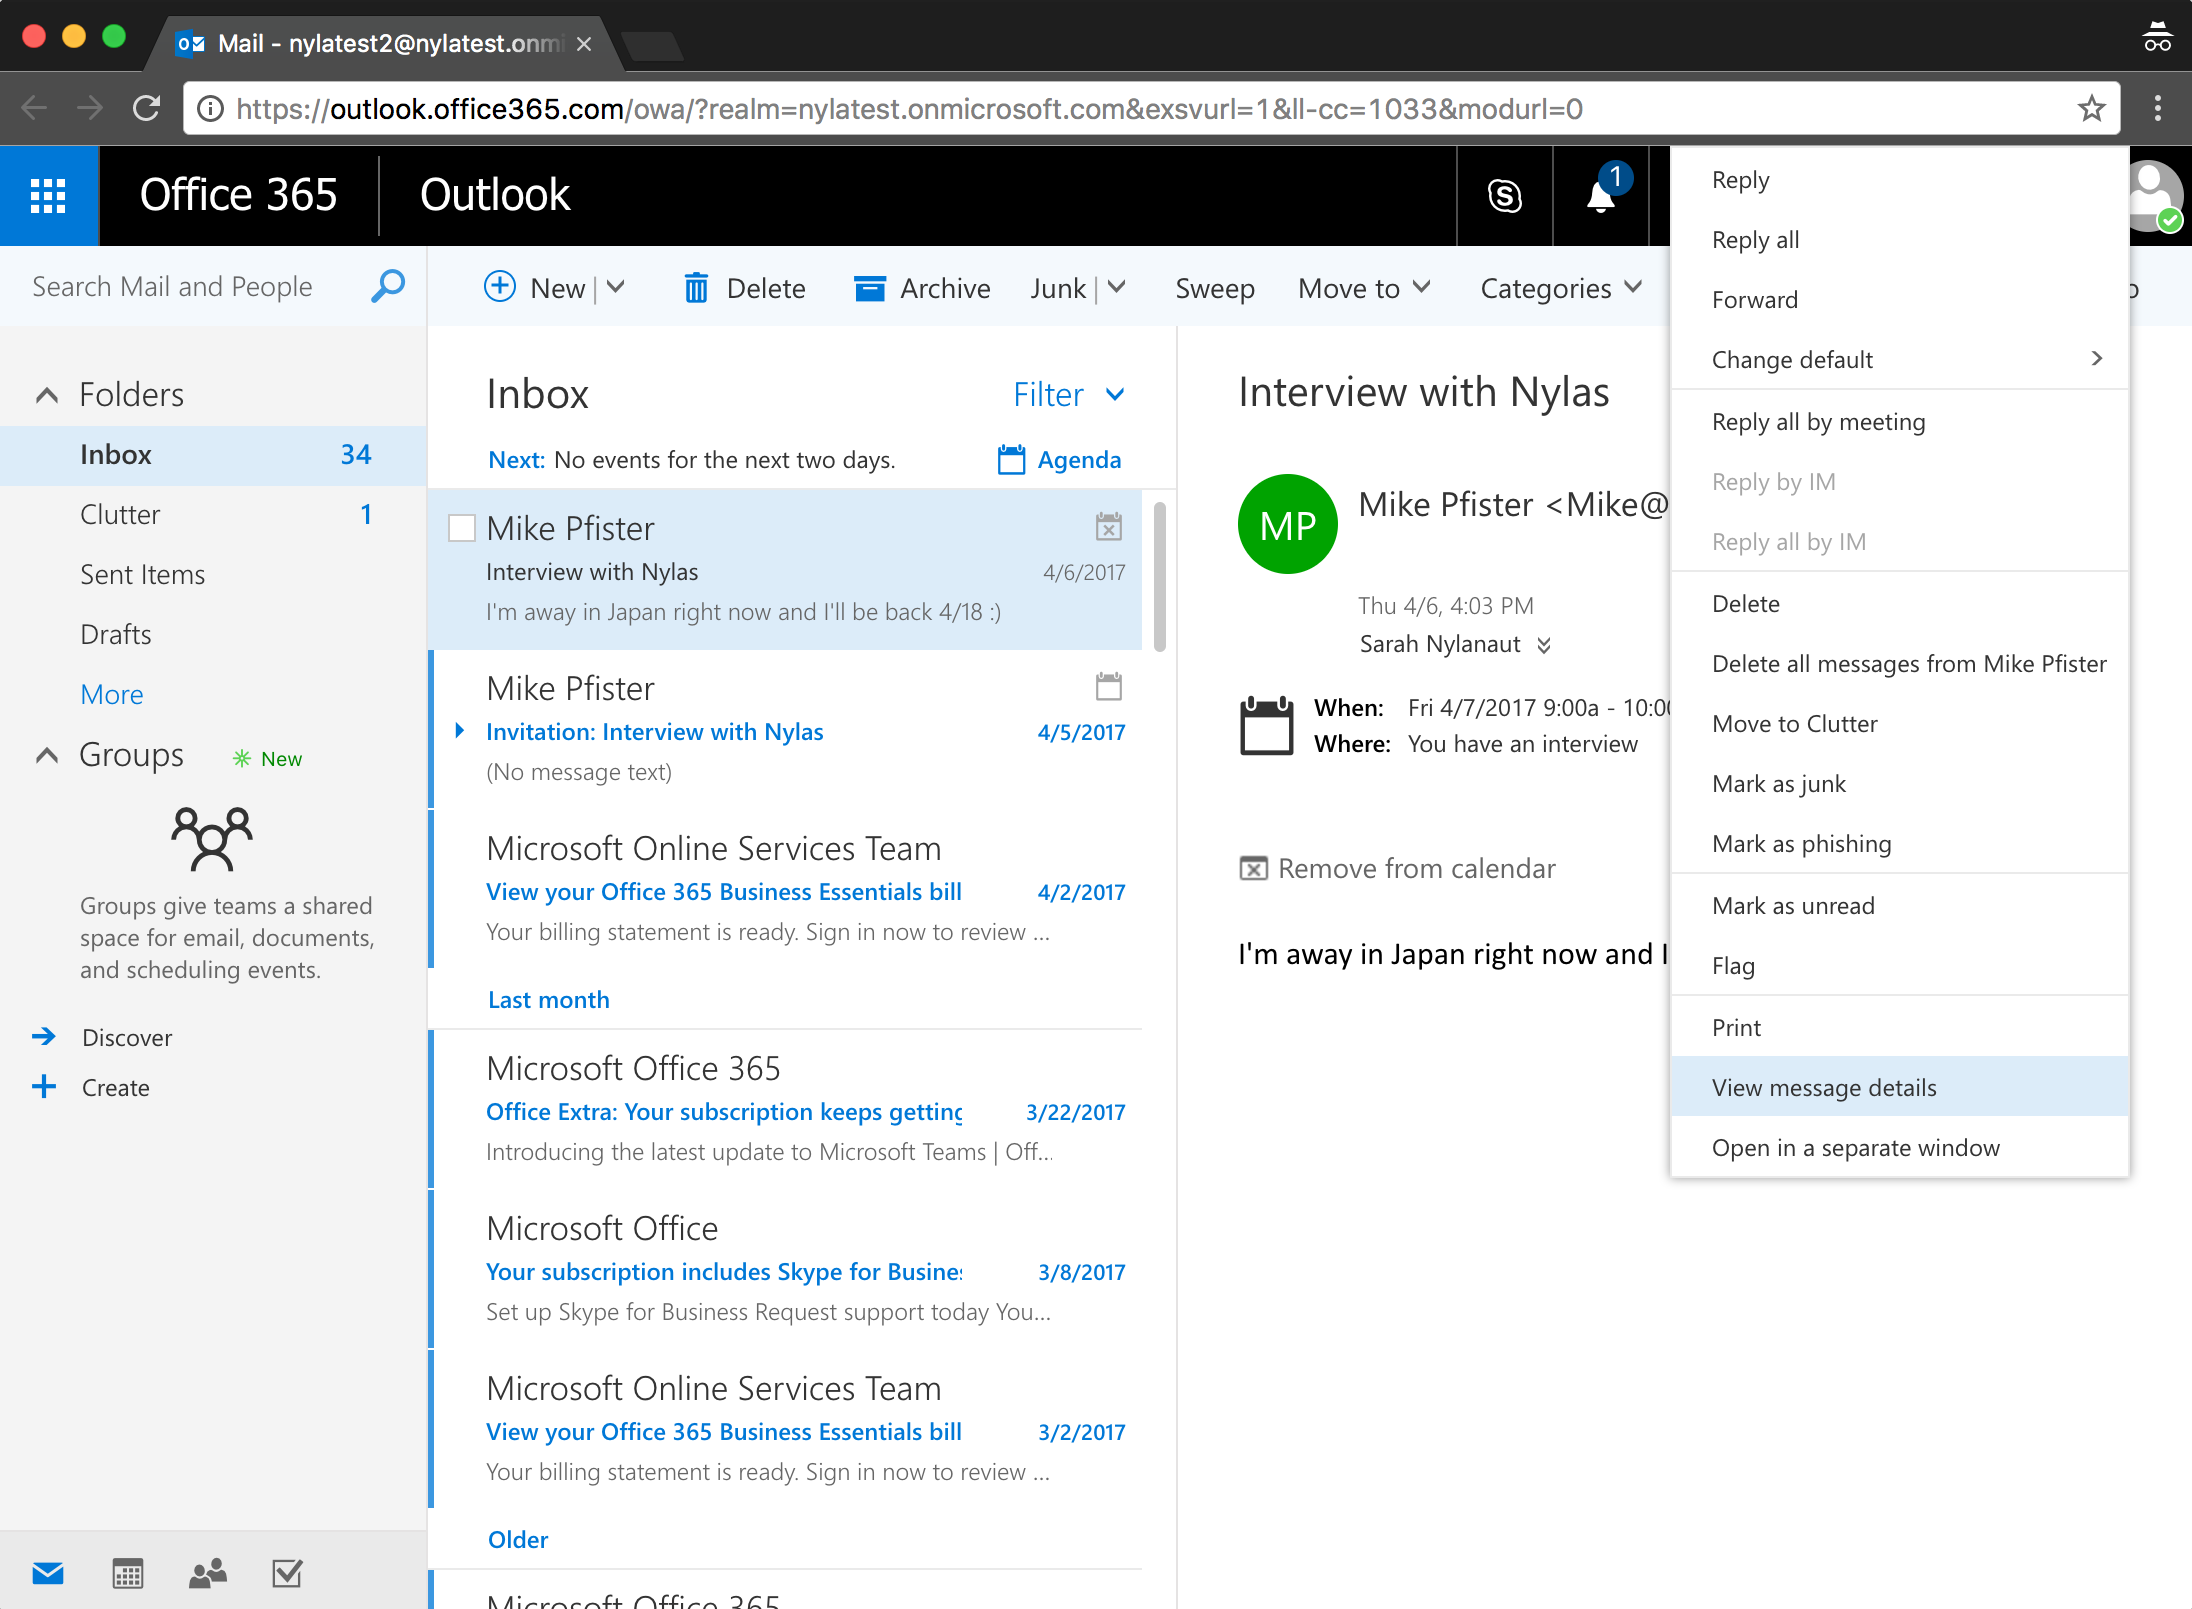 The Microsoft Outlook interface showing a user's inbox. An email message is open, and the options menu is expanded. "View message details" is highlighted.